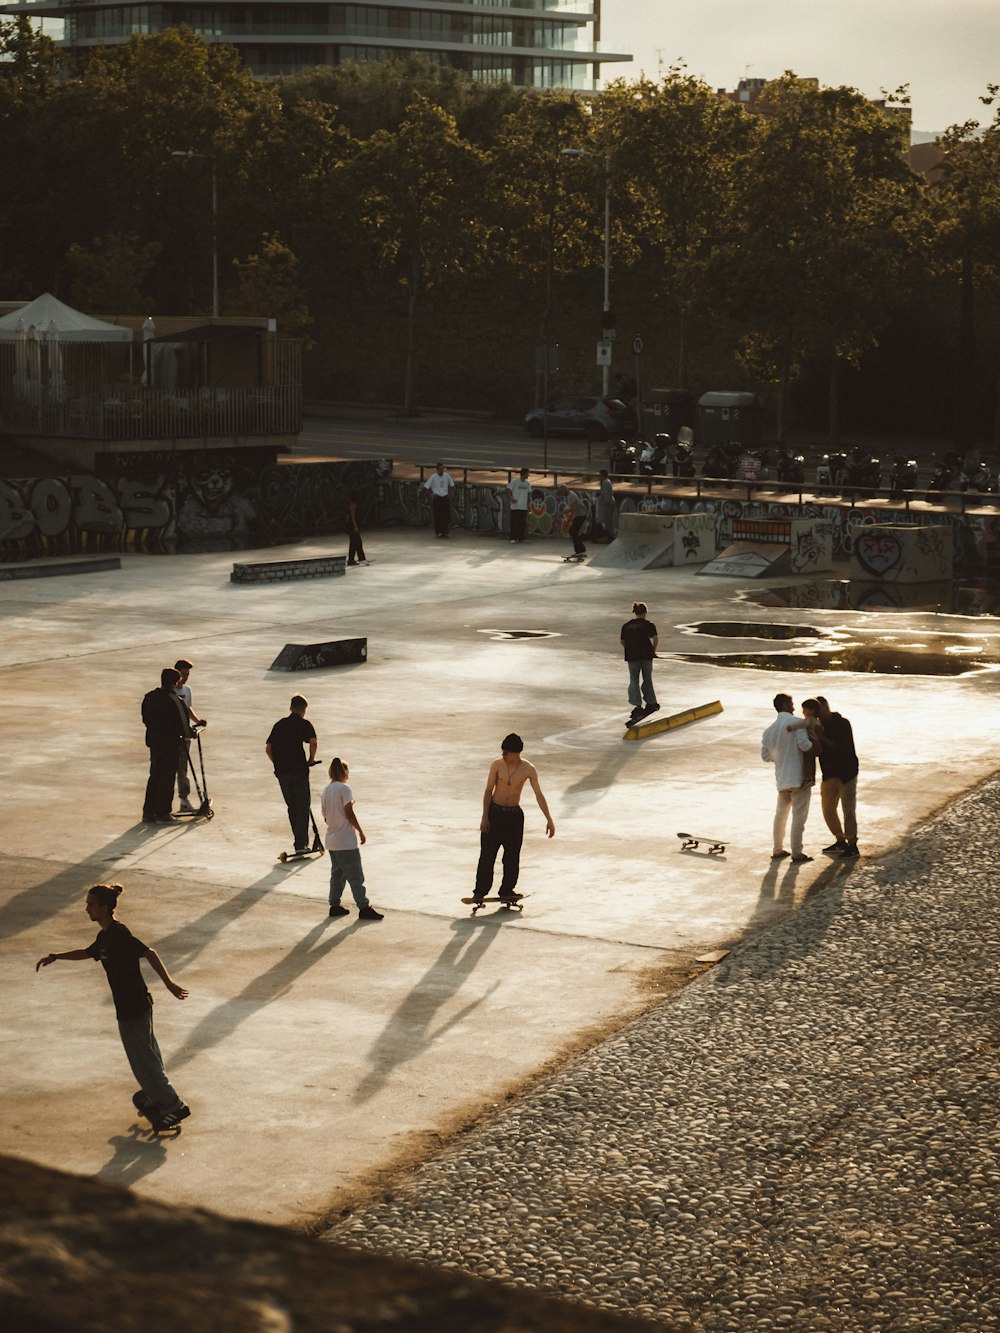 people playing on ice field during daytime